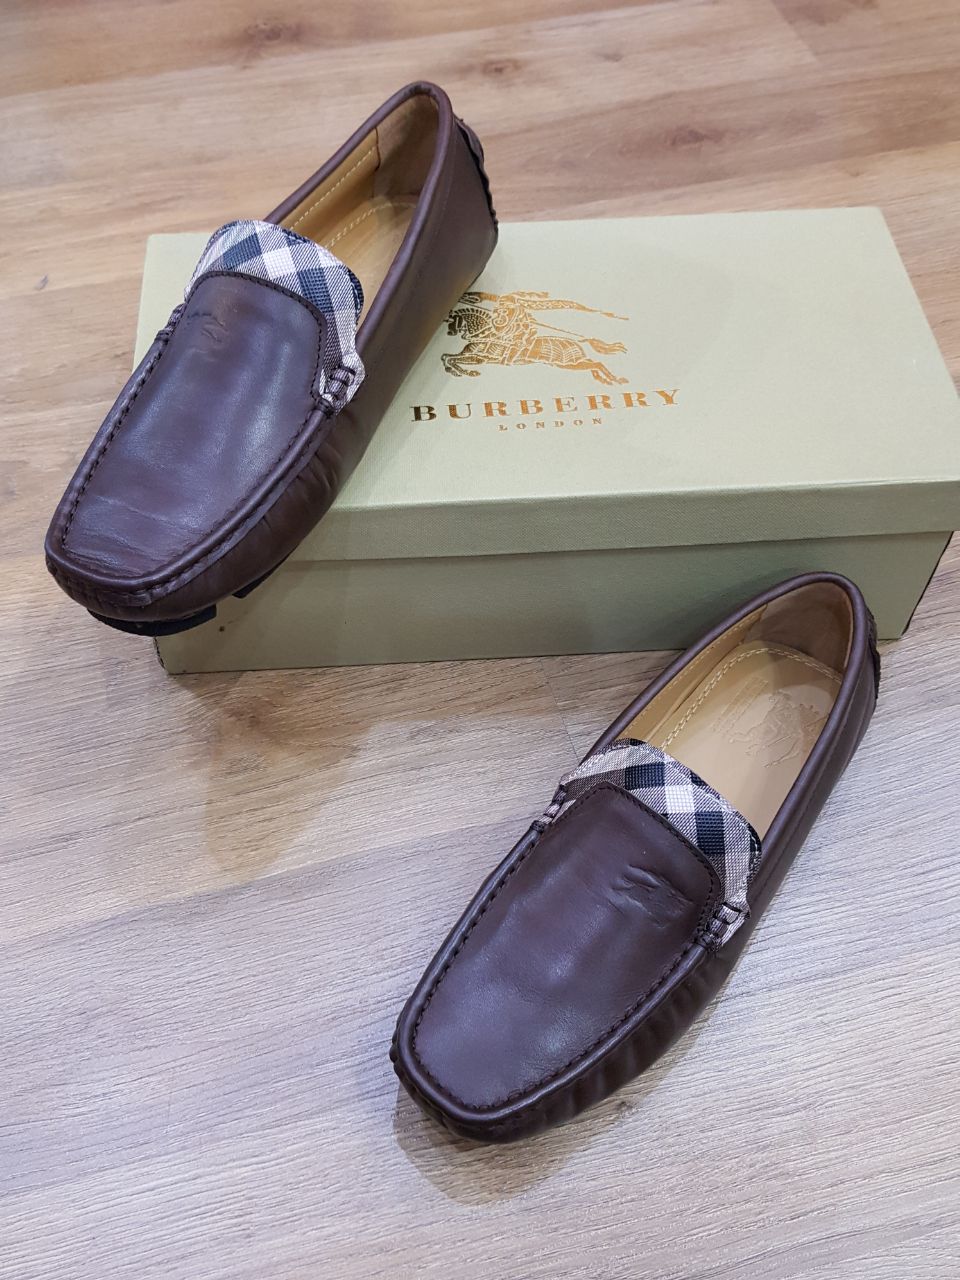 2018 burberry shoes